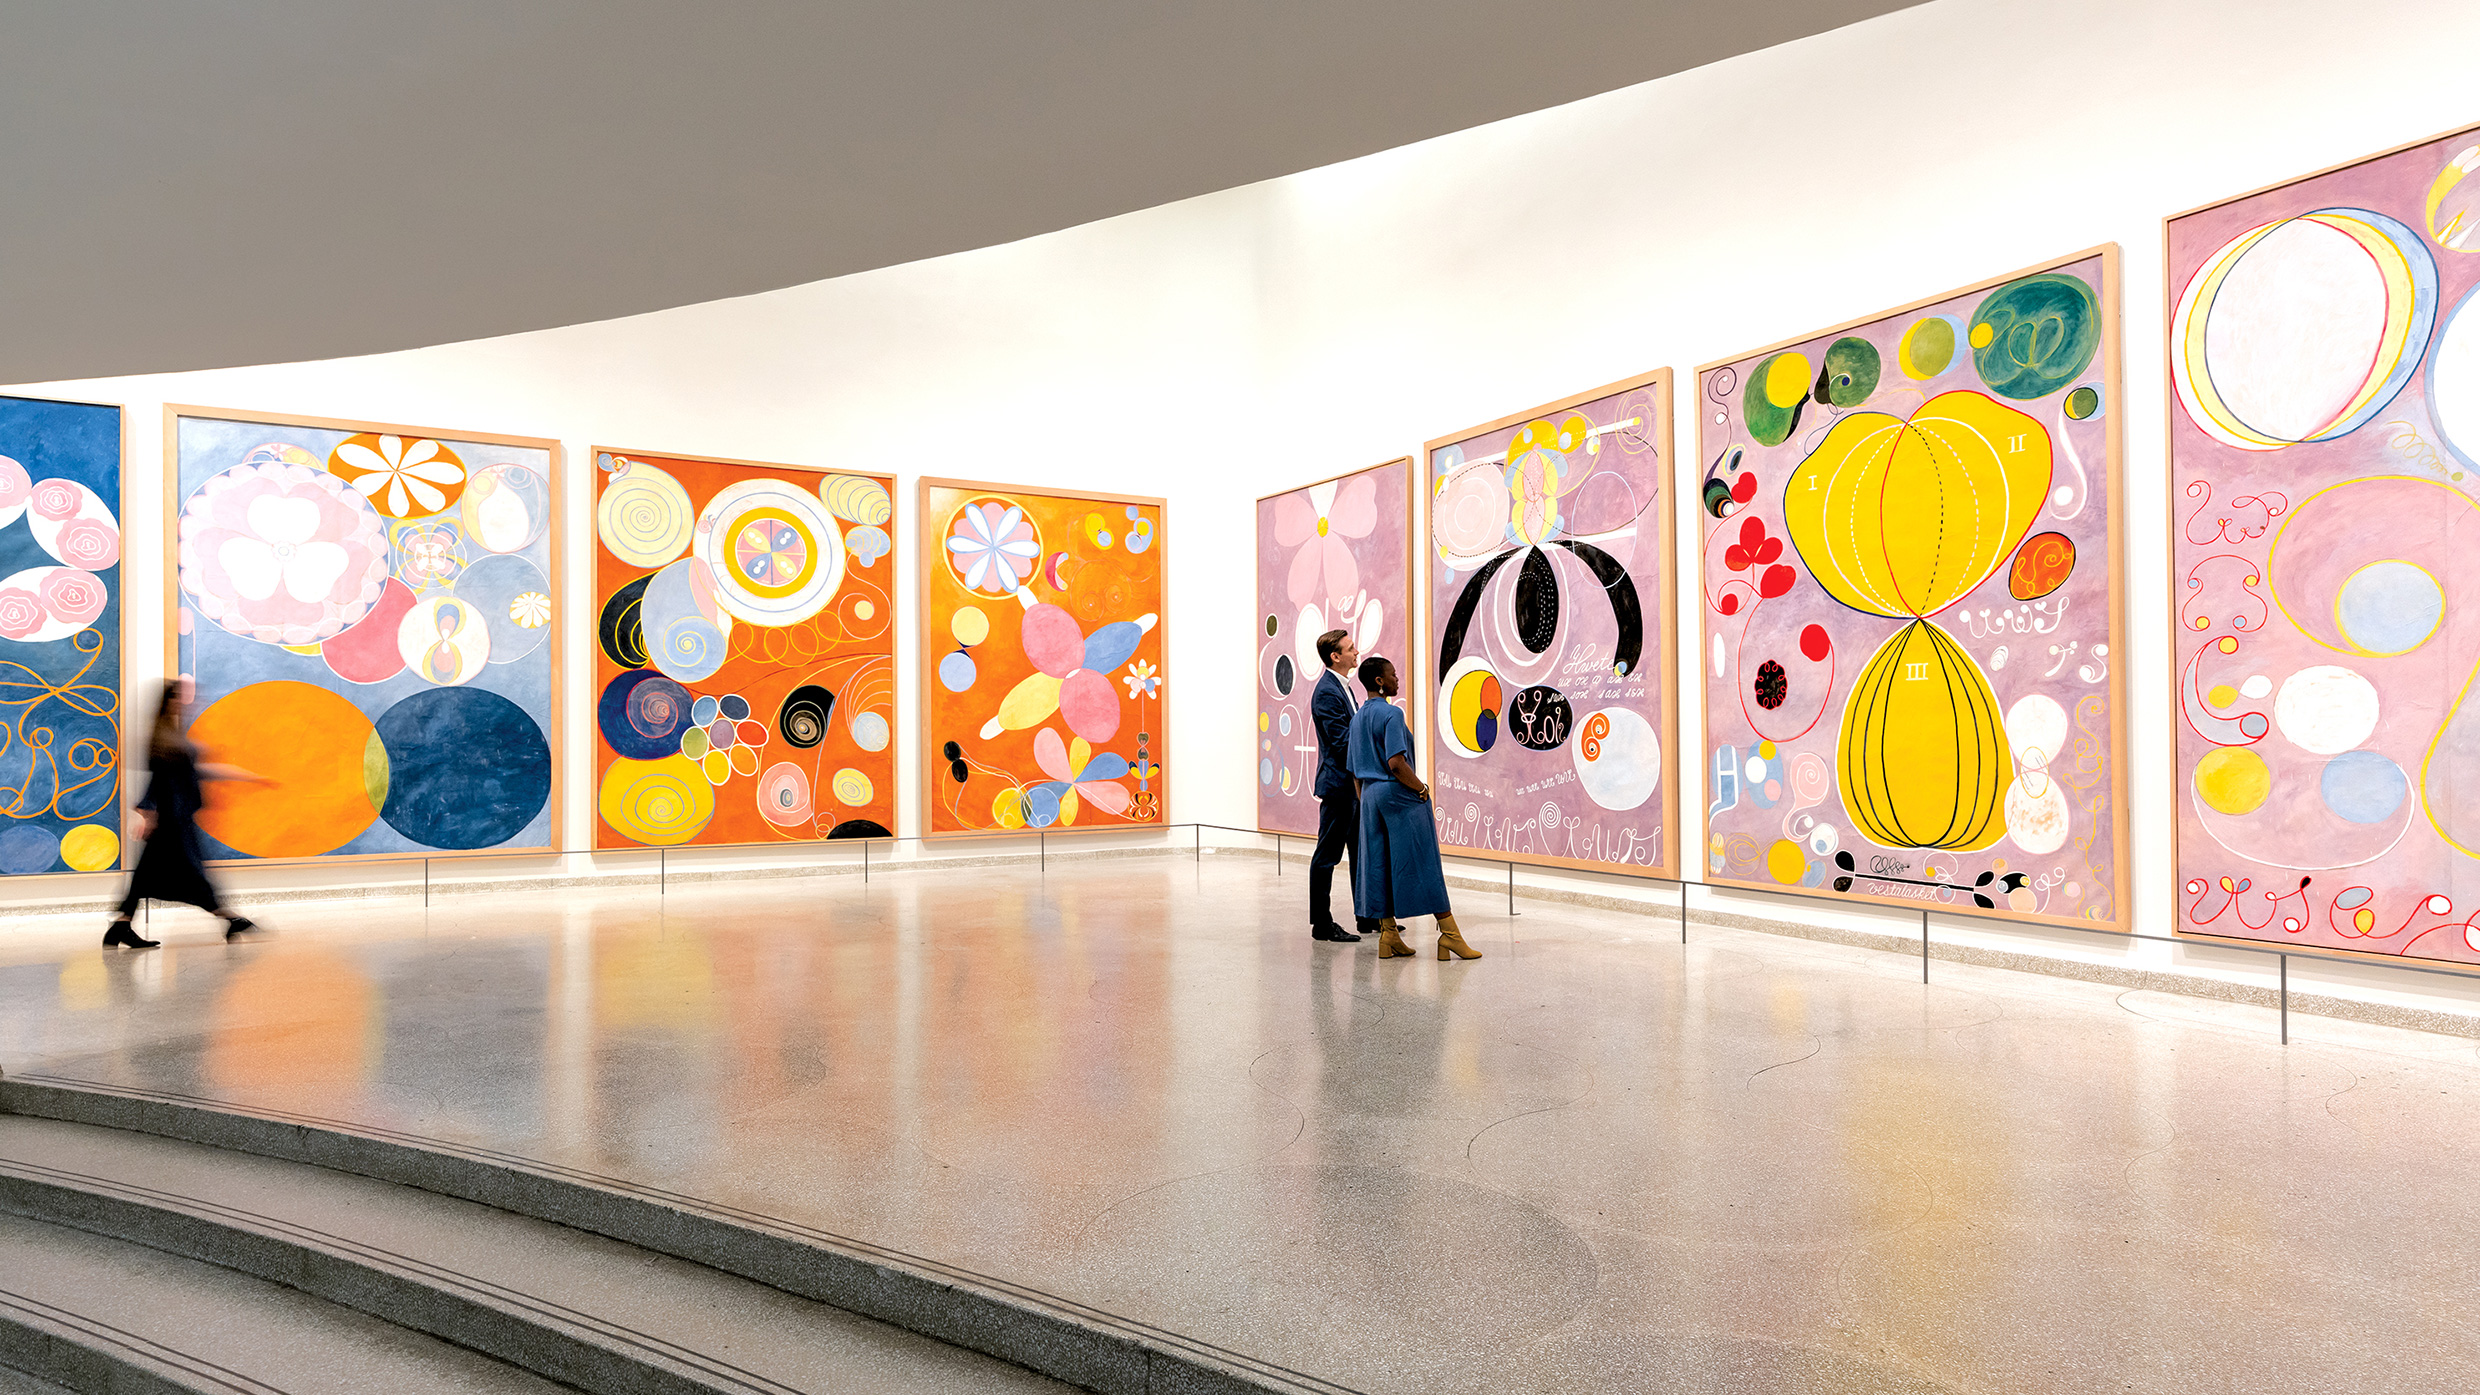 Hilma af Klint: Paintings for the Future | The Guggenheim Museums